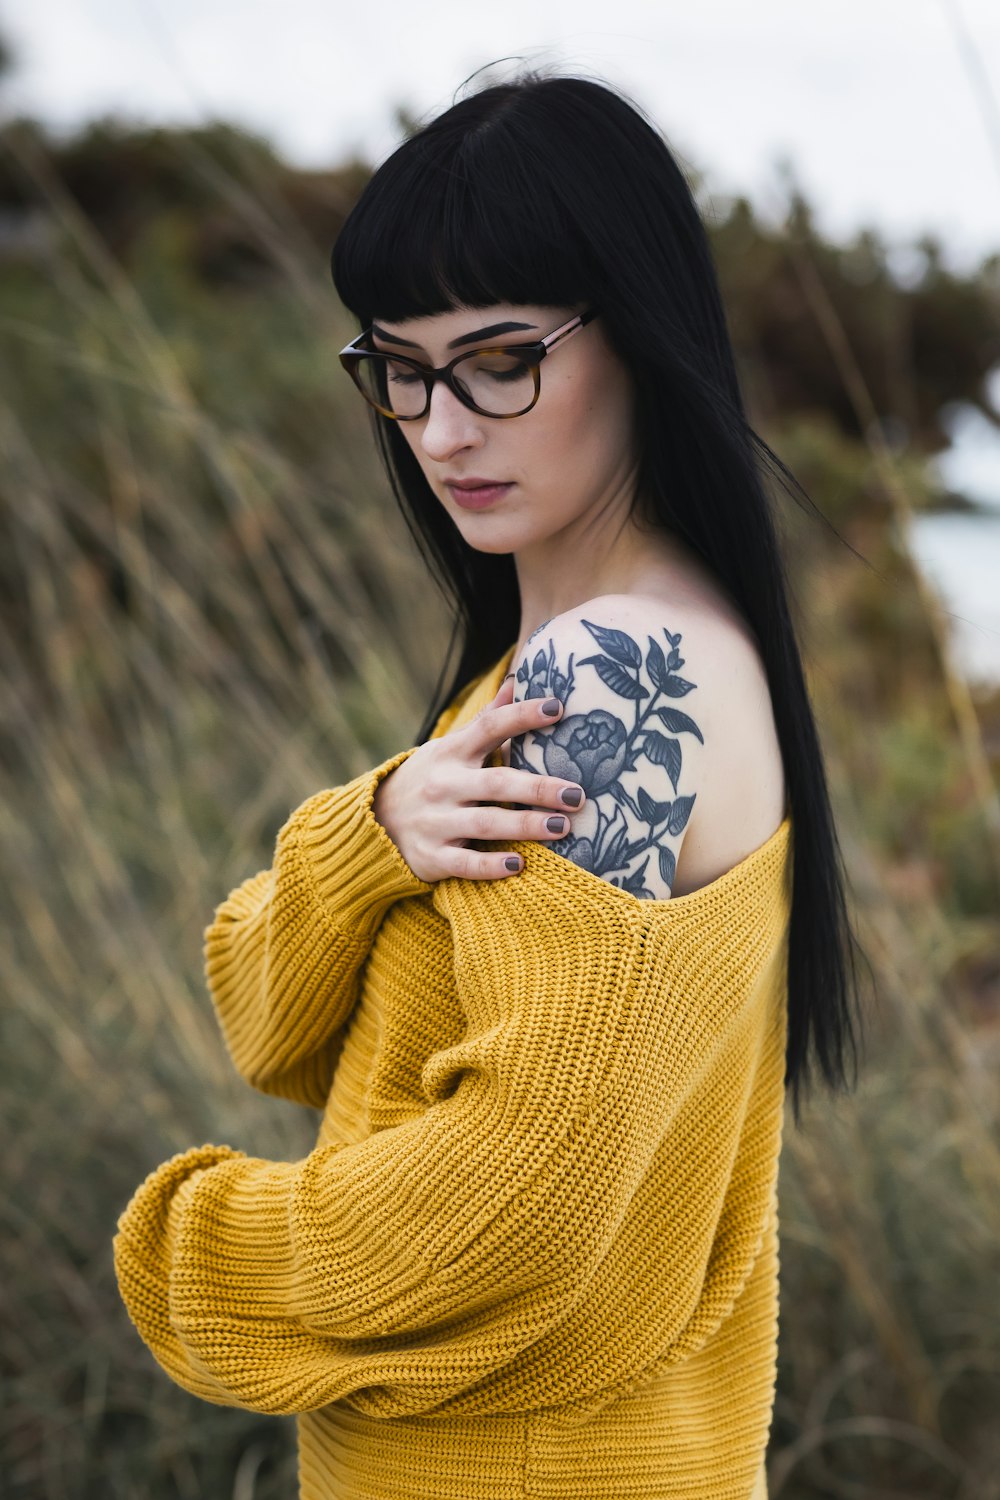 woman wearing yellow sweater showing her rose flower arm tattoo